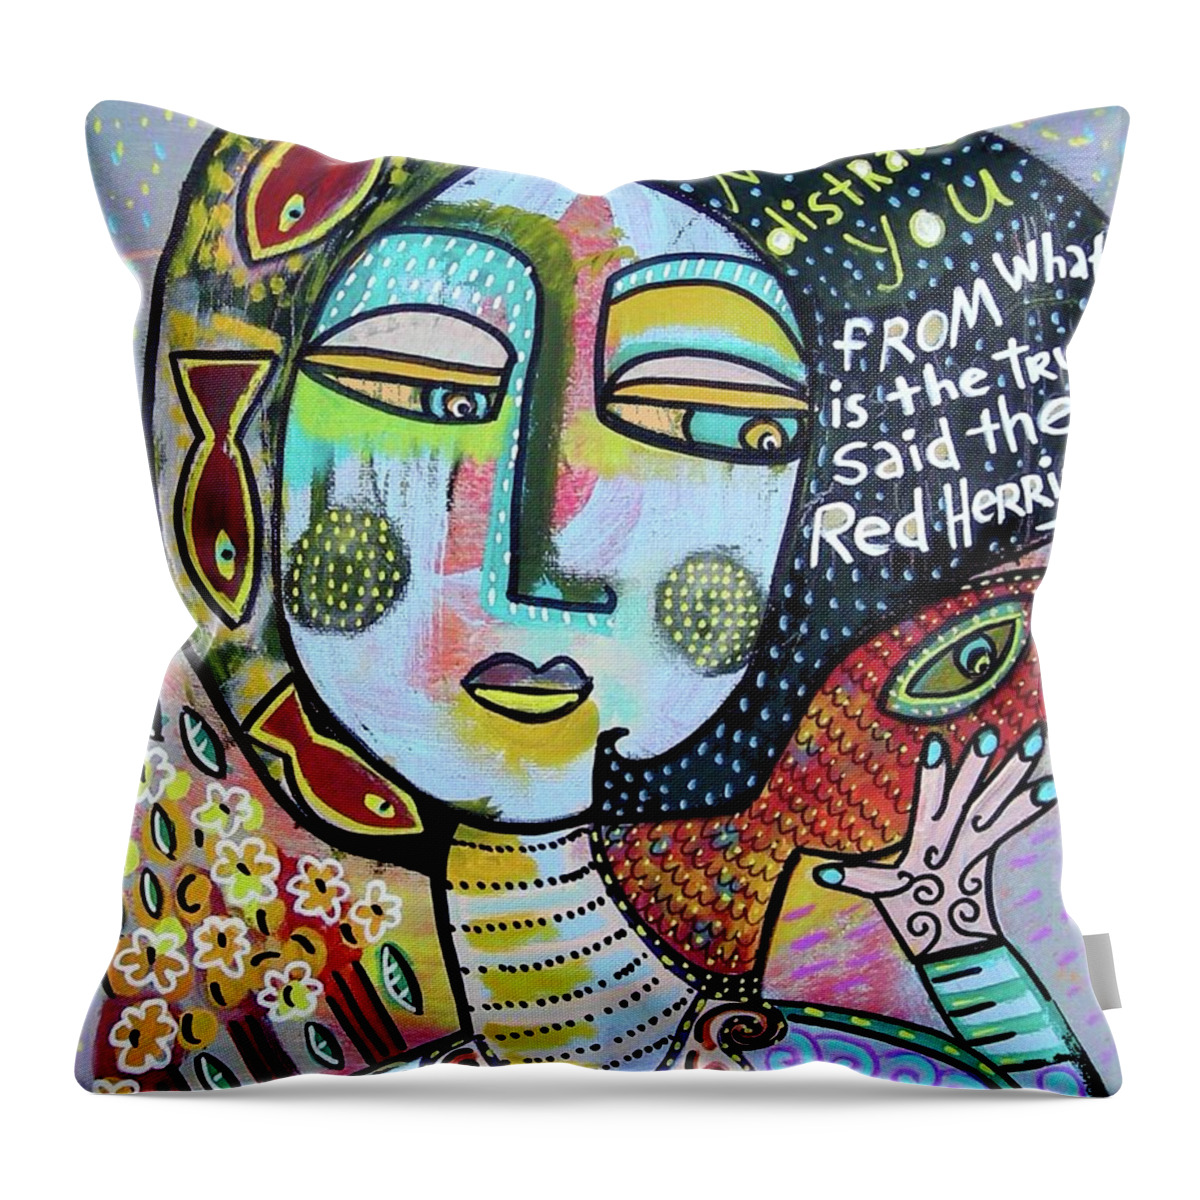  Throw Pillow featuring the painting The Red Herring Fish Of Distraction by Sandra Silberzweig